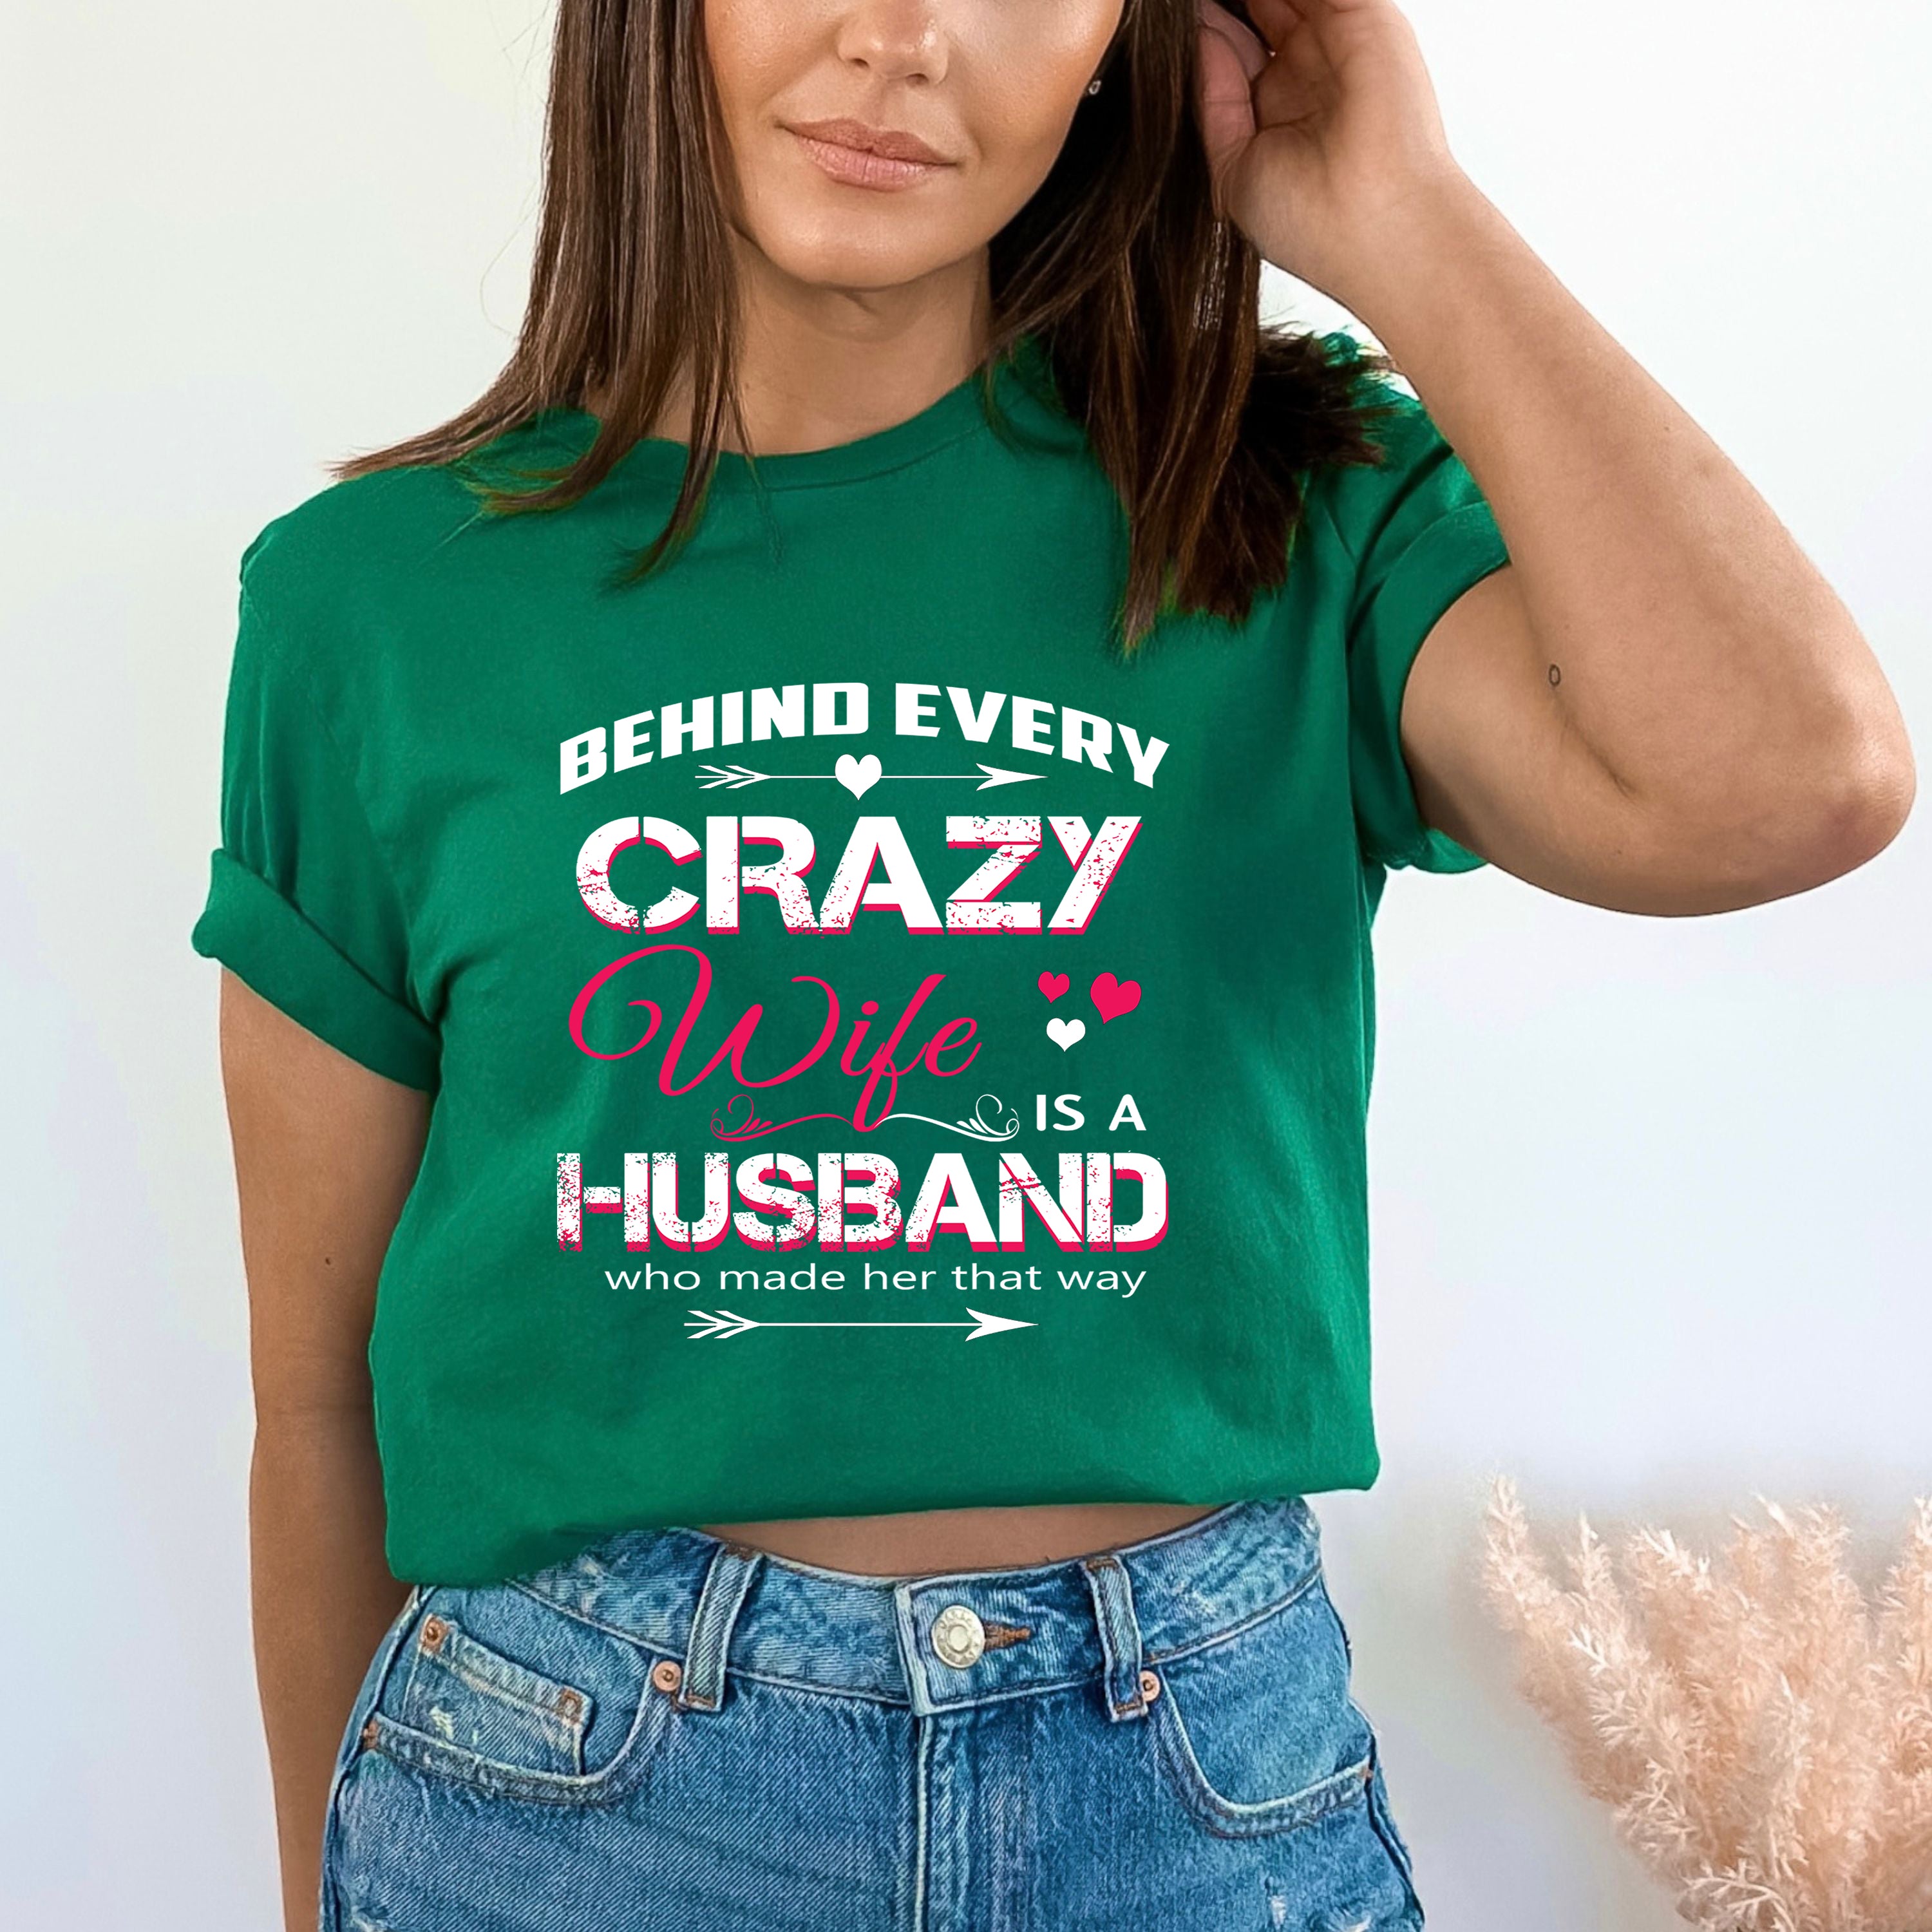 "Behind Every Crazy Wife is a Husband"